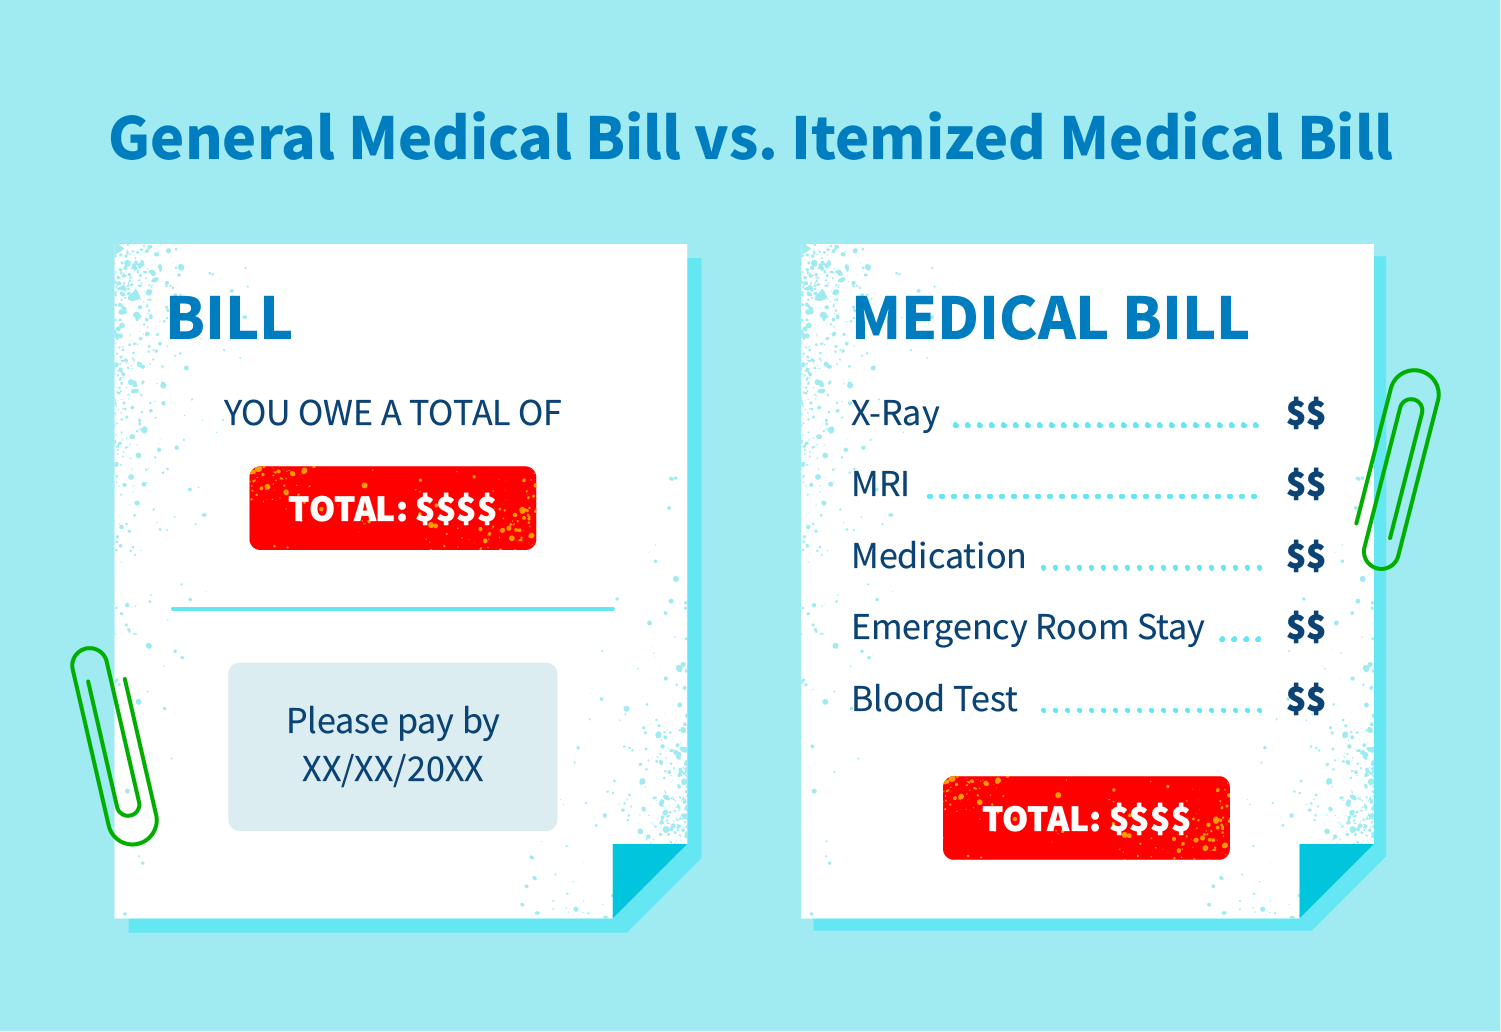 General medical bill vs. itemized medical bill: General bill shows total sum, itemized bill shows individual breakdown of charges equaling the total amount owed.